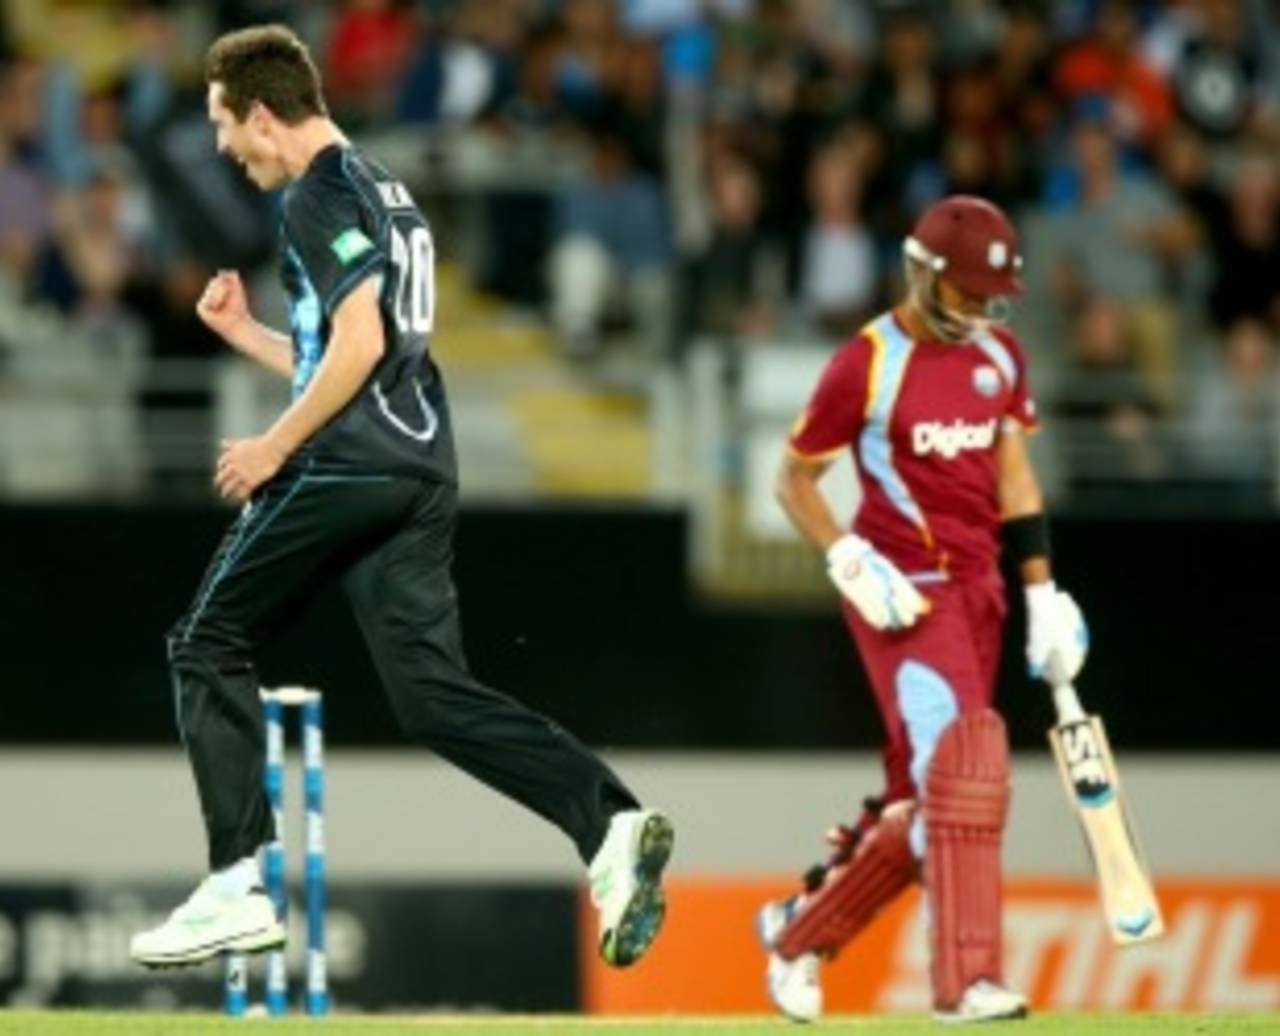 Adam Milne had Lendl Simmons caught behind, New Zealand v West Indies, 1st T20, Auckland, January 11, 2014